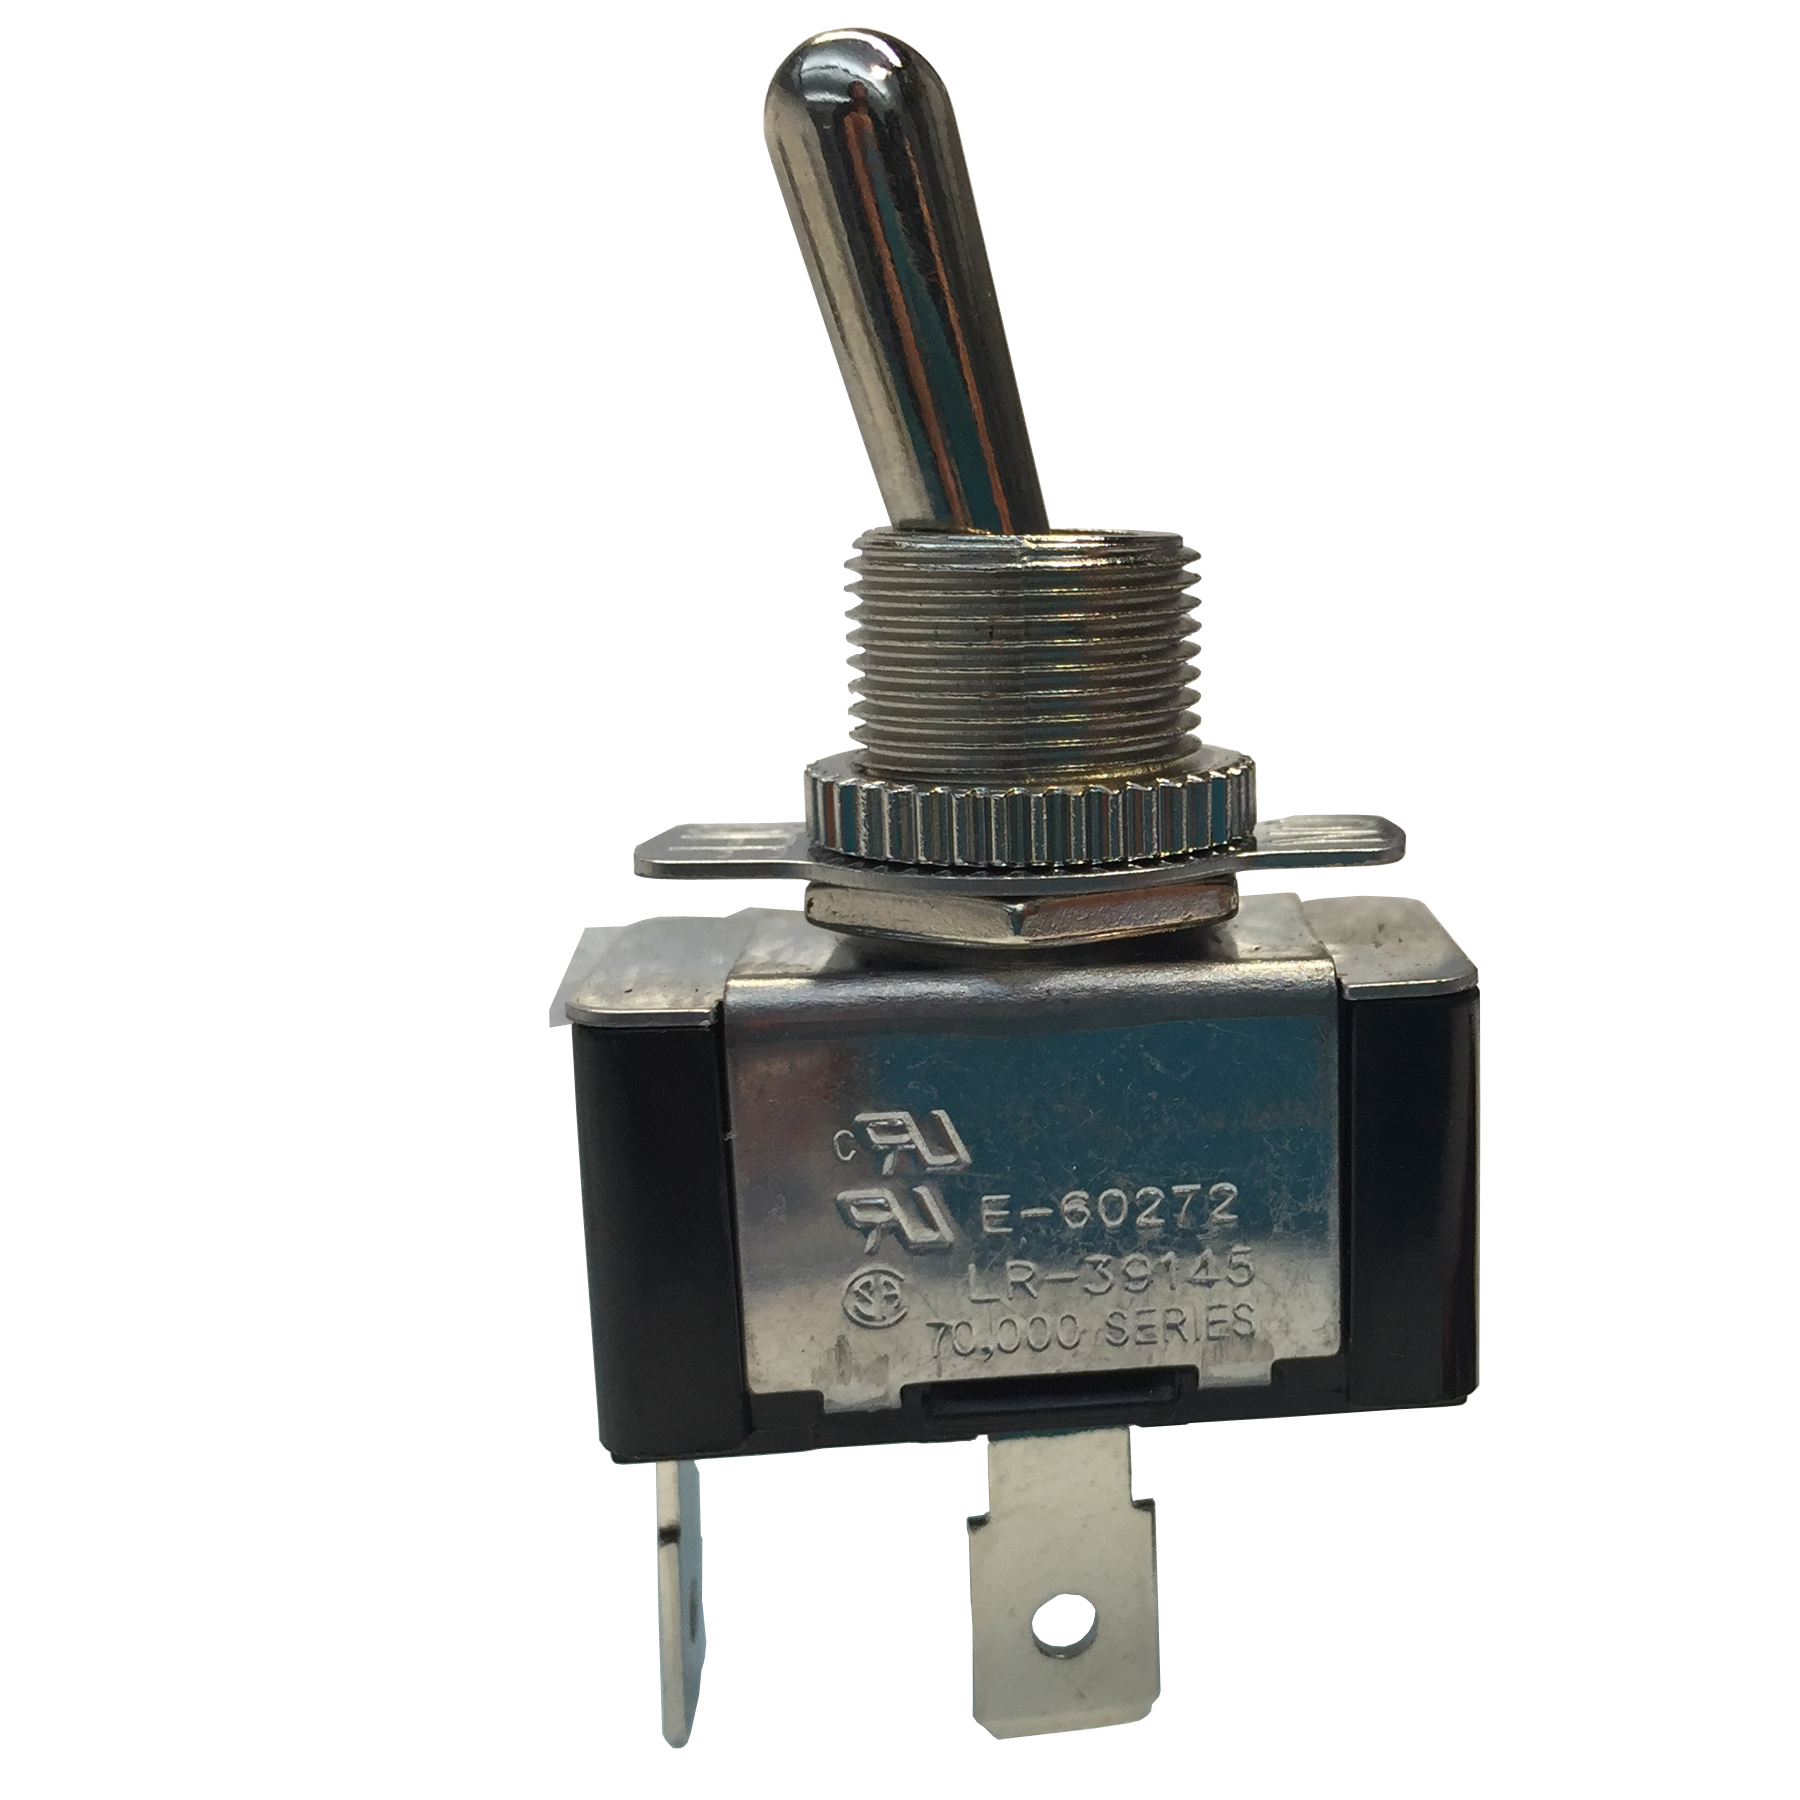 GB GARDNER GSW-120 ON-OFF-ON  SINGLE POLE DOUBLE THROW TOGGLE SWITCH 6444582 